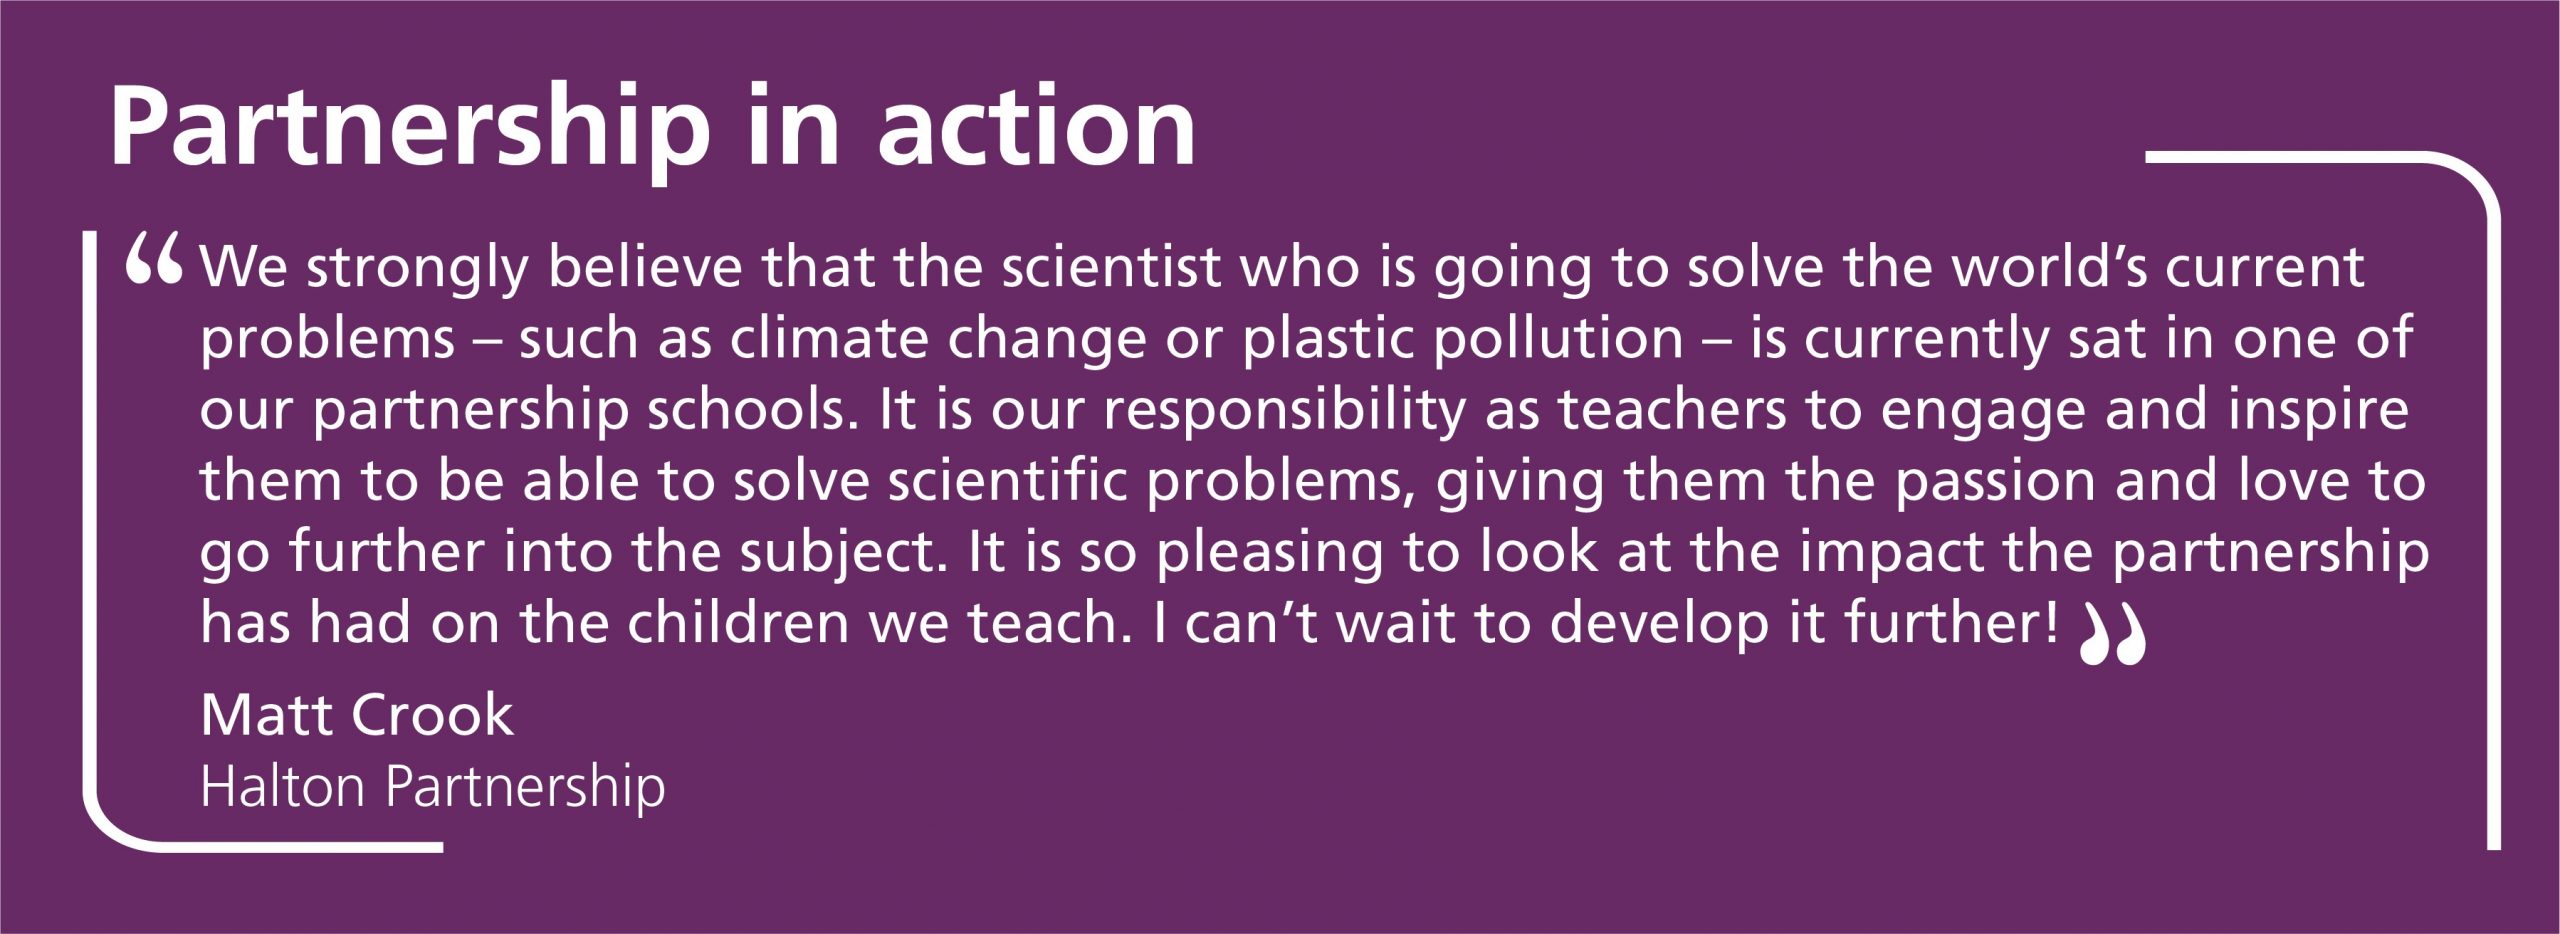 We strongly believe that the scientist who is going to solve the world’s current problems – such as climate change or plastic pollution – is currently sat in one of our partnership schools. It is our responsibility as teachers to engage and inspire them to be able to solve scientific problems, giving them the passion and love to go further into the subject. It is so pleasing to look at the impact the partnership has had on the children we teach. I can’t wait to develop it further!